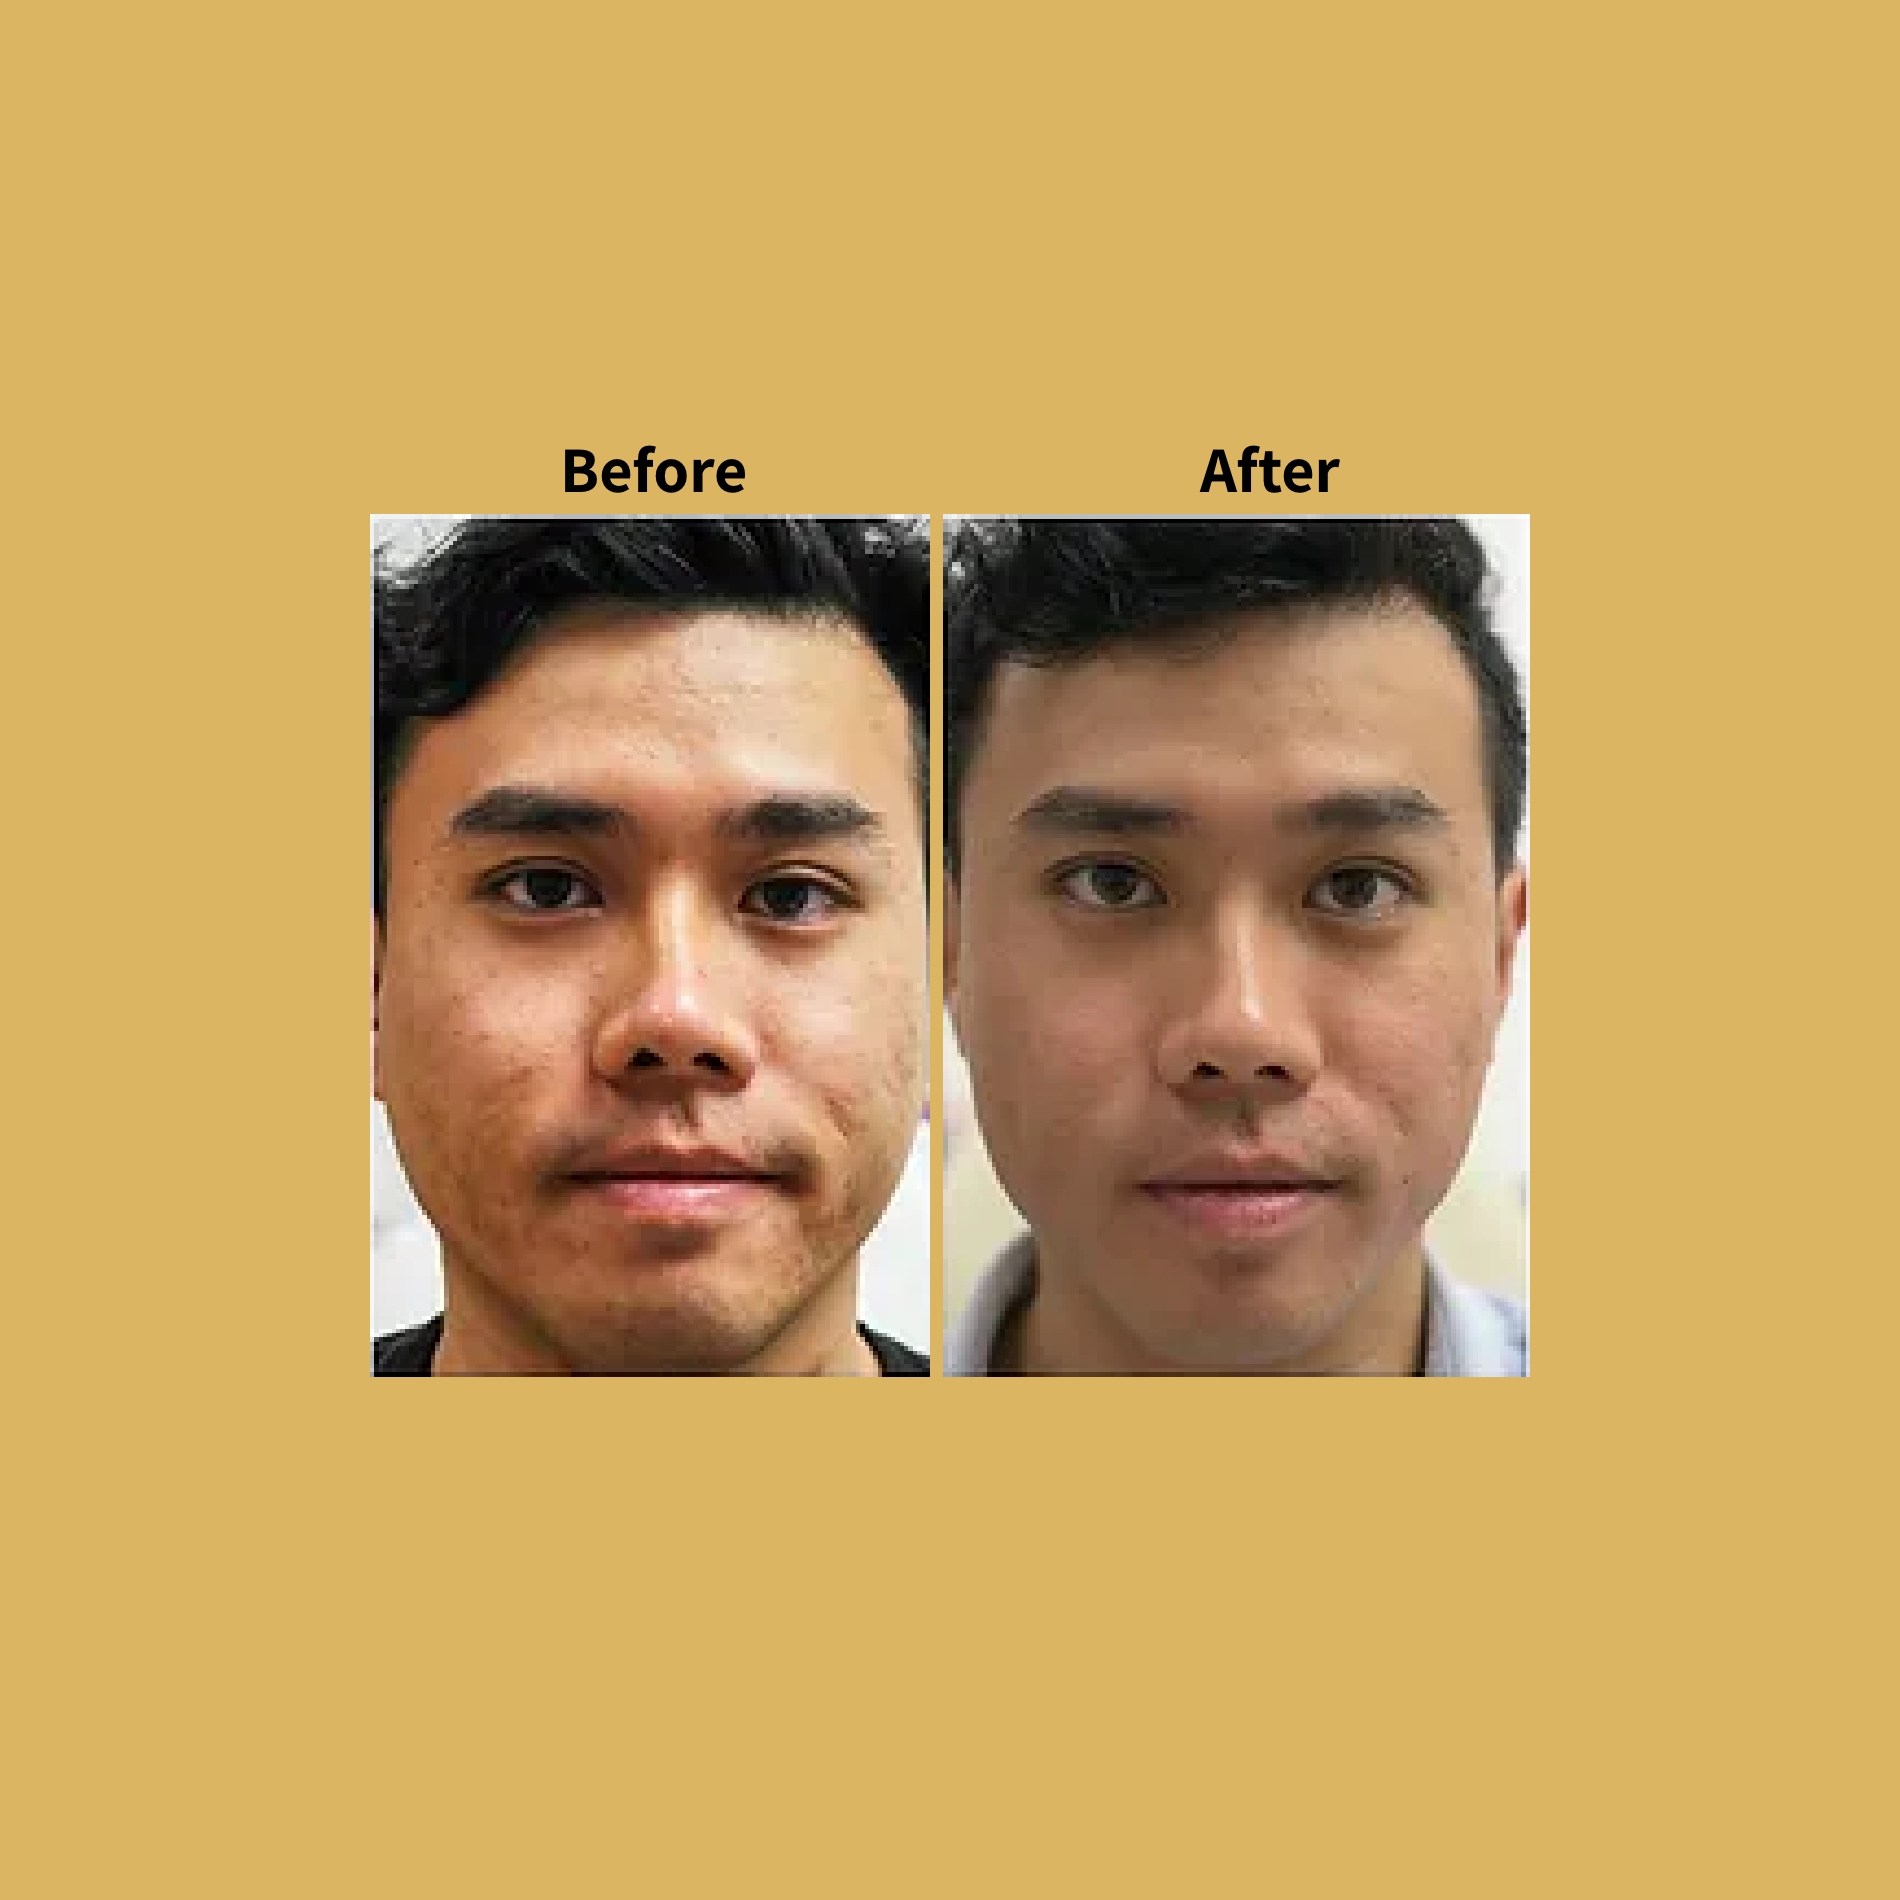 Pixel Perfect Skin Rejuvenation Before and After Photos | Soleil Medical & Beauty Spa in Portland, OR